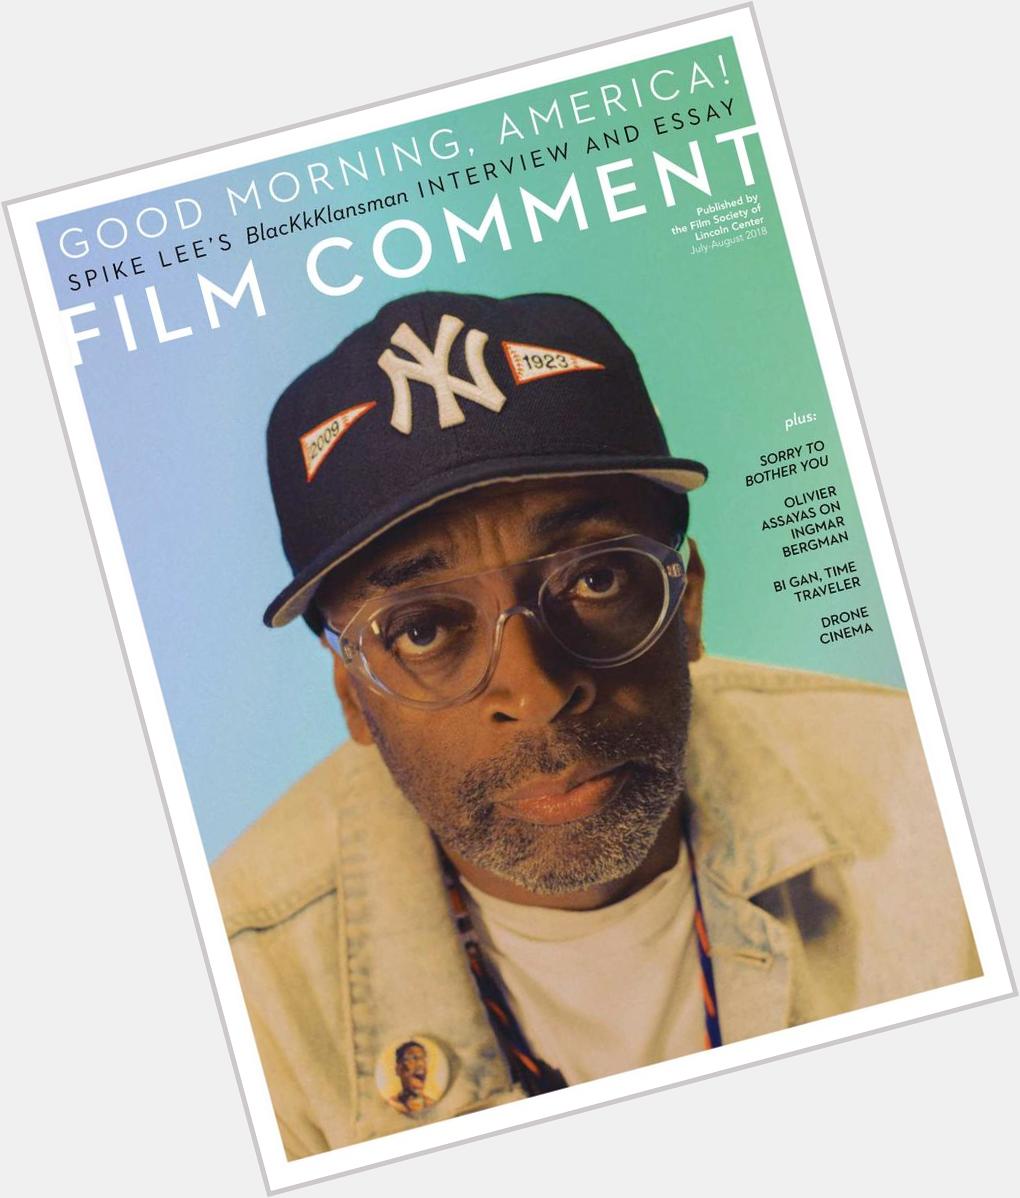 Happy birthday, Spike Lee!

Explore this issue & more in our archive:  